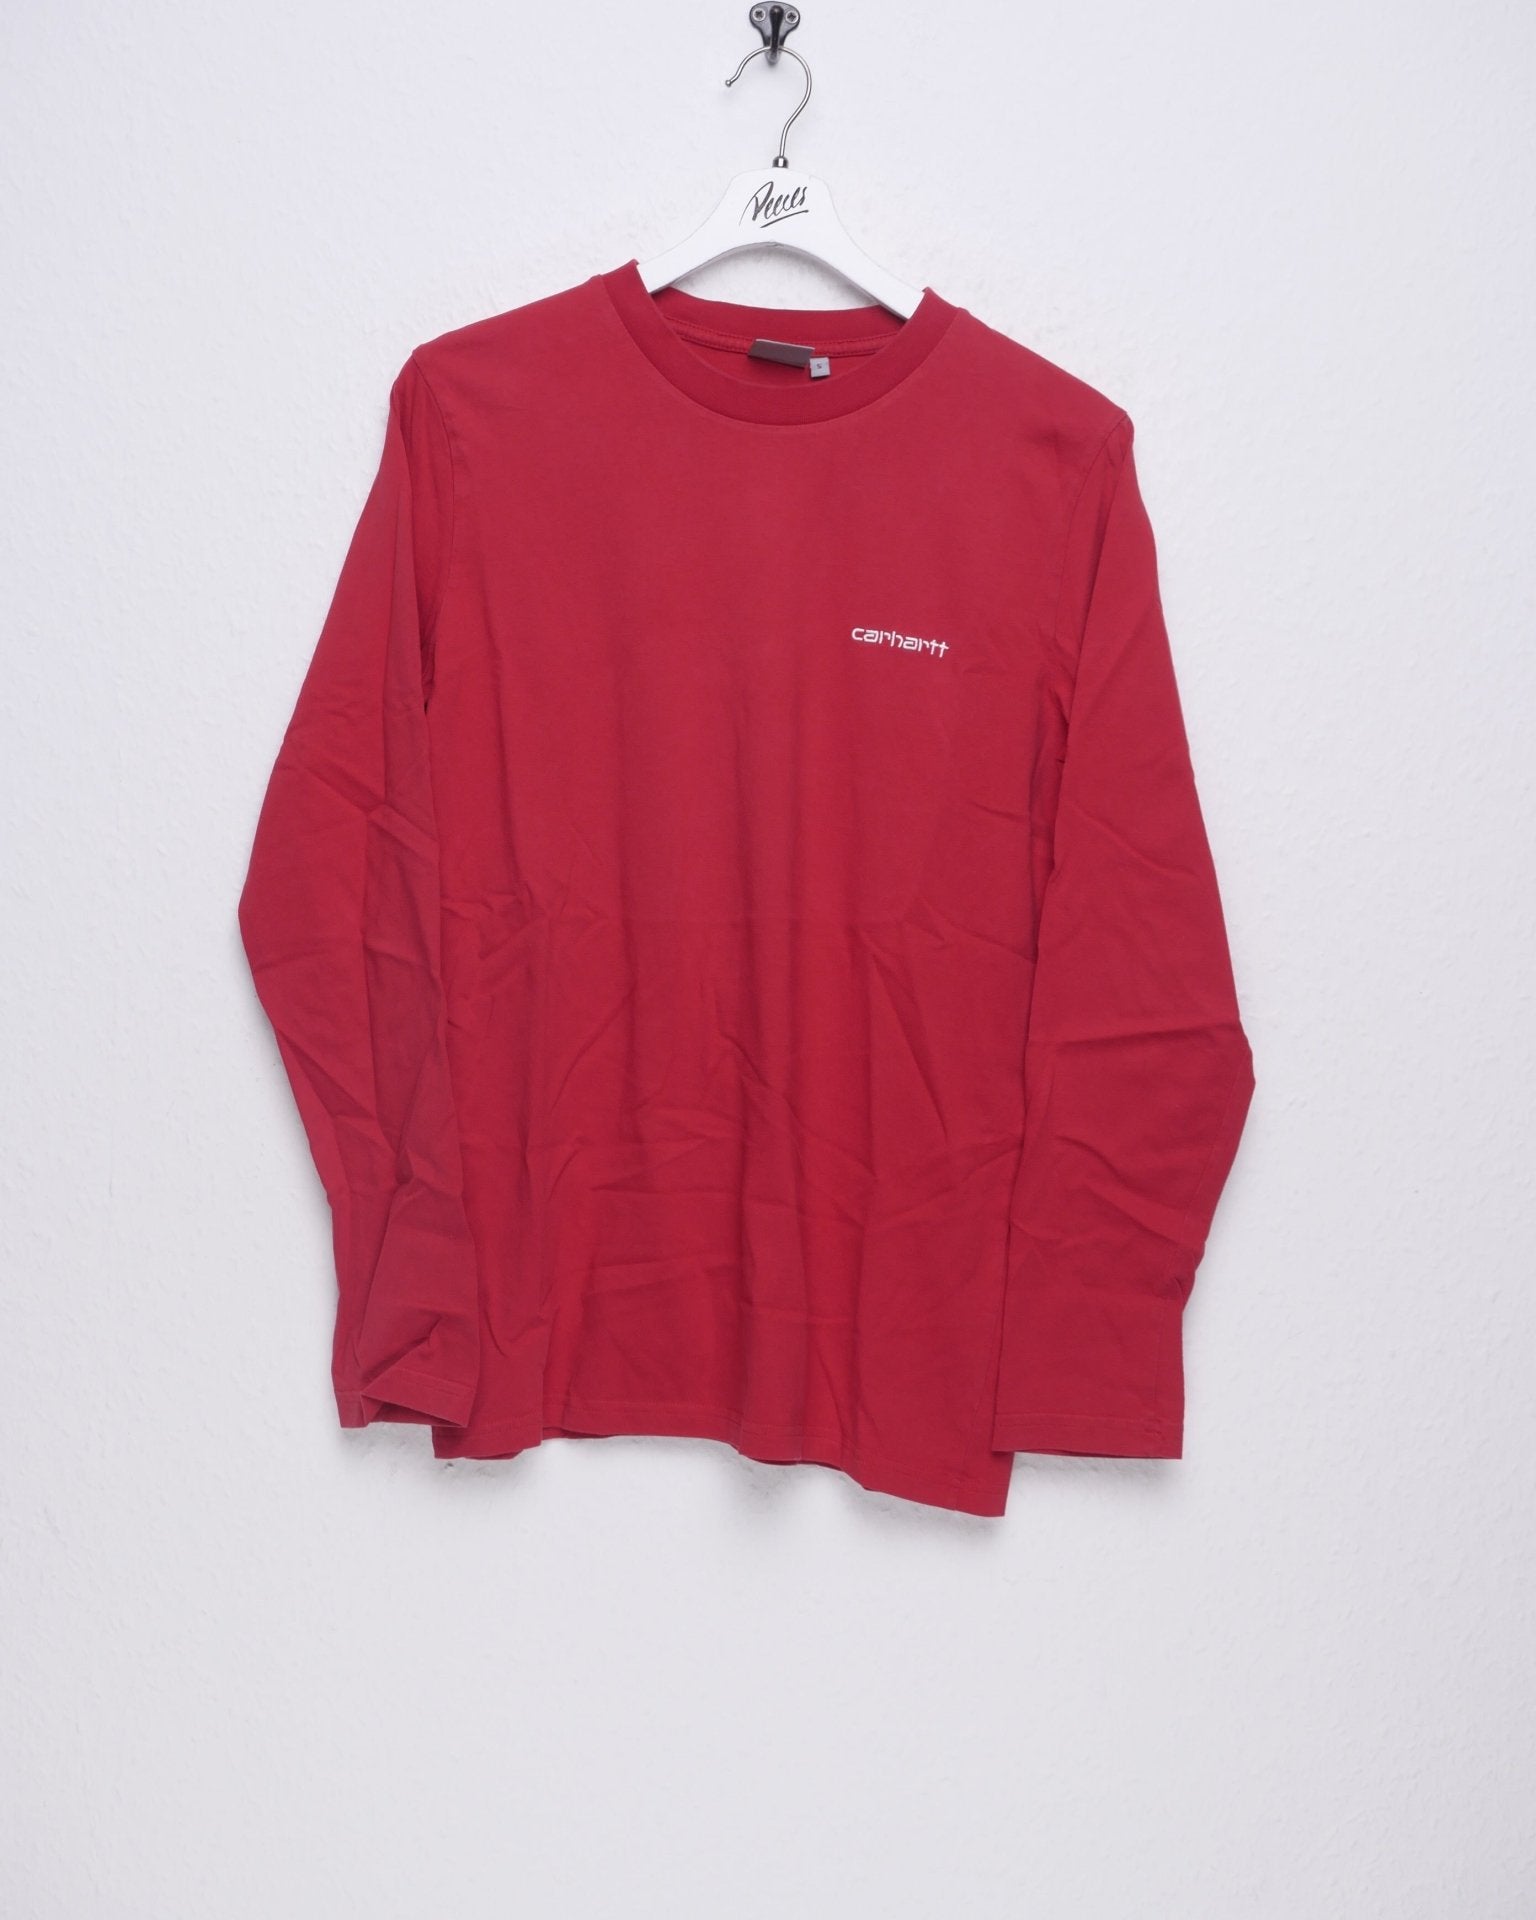 Carhartt embroidered Spellout Vintage L/S Shirt - Peeces